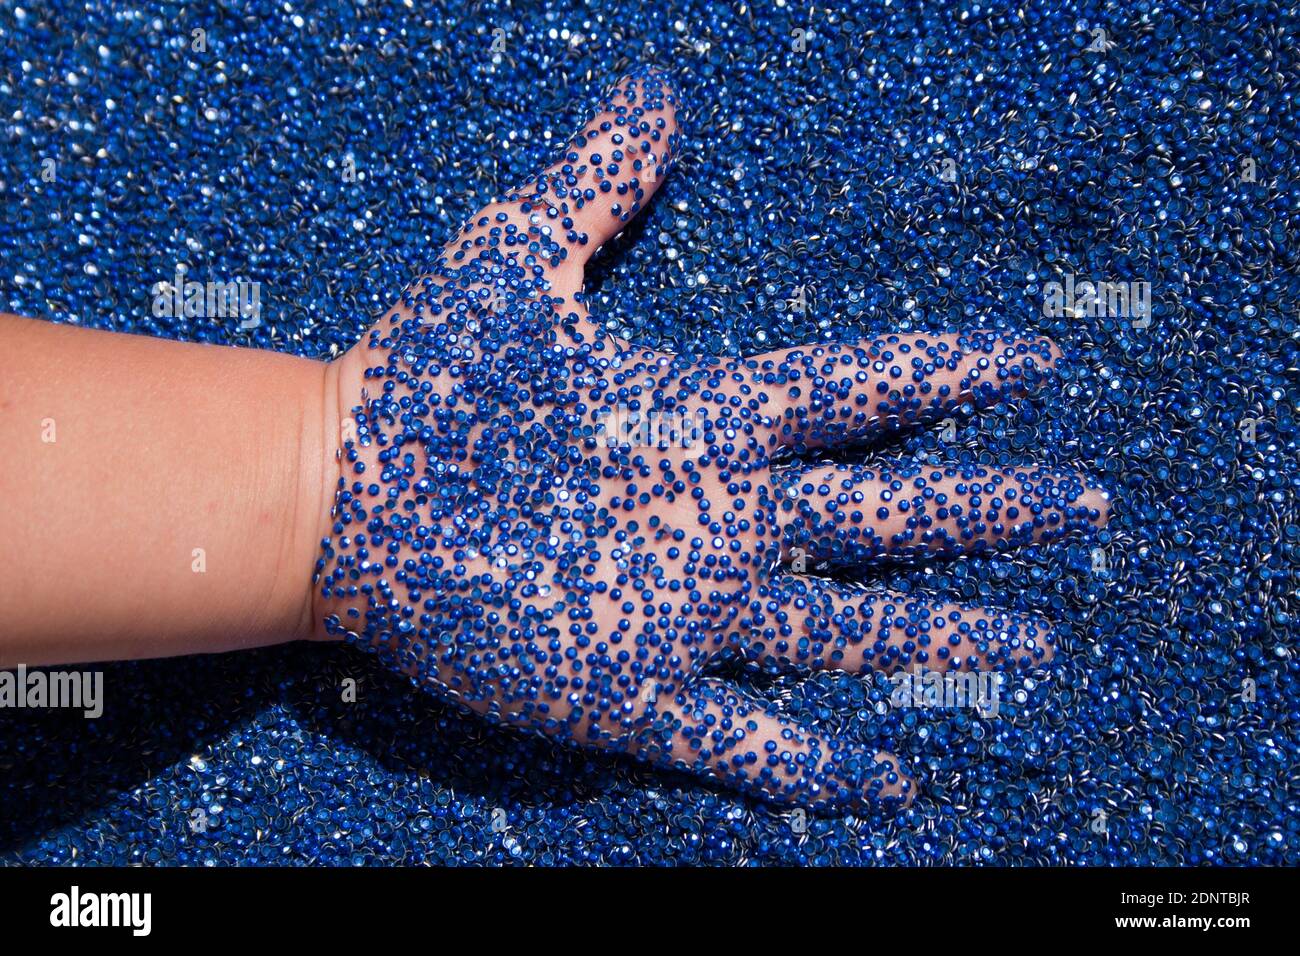 Child's hand in blue rhinestones. A lot of blue glue rhinestones and the kids hand Stock Photo